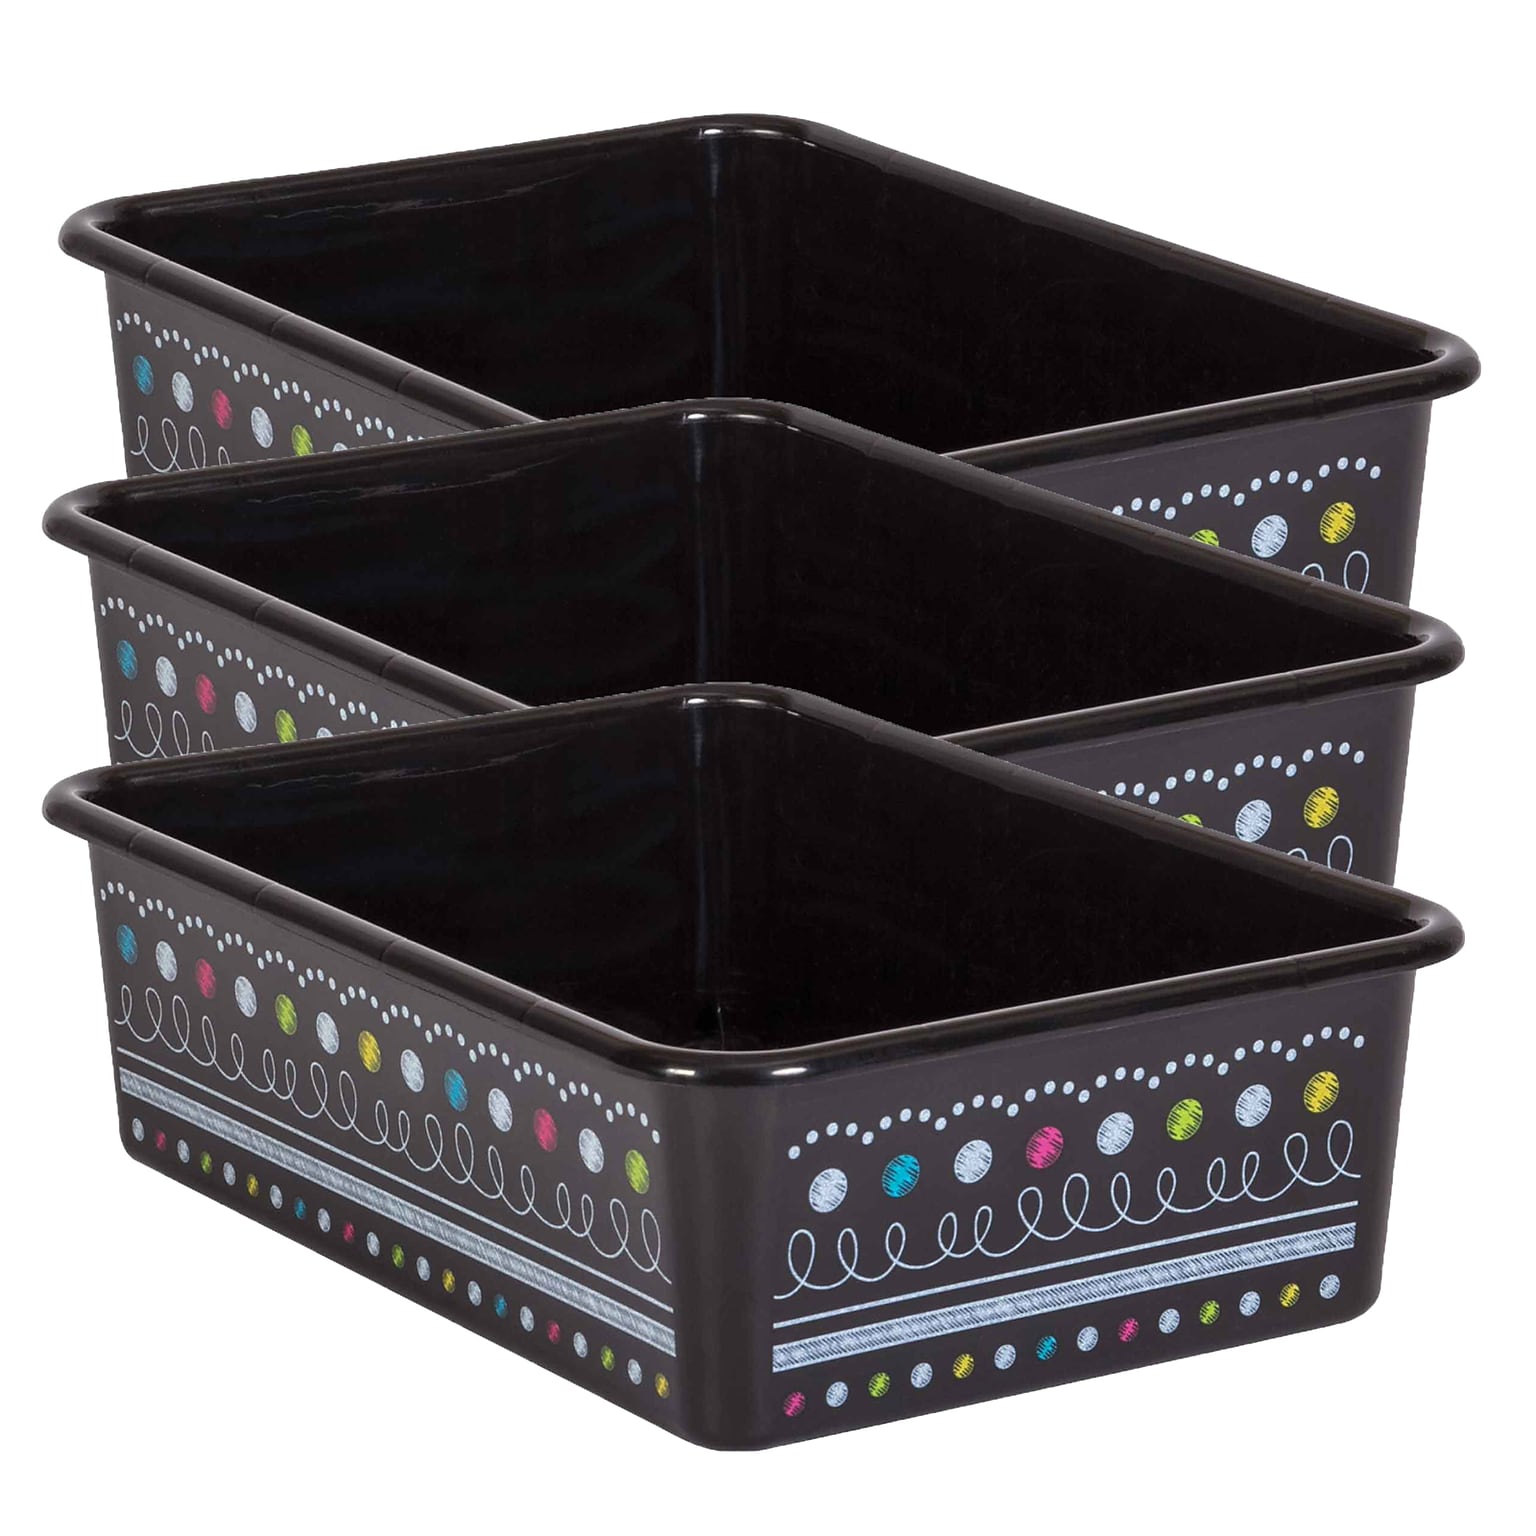 Teacher Created Resources® Plastic Storage Bin, Large, 11.5 x 16.25 x 5, Chalkboard Brights, Pack of 3 (TCR20901-3)